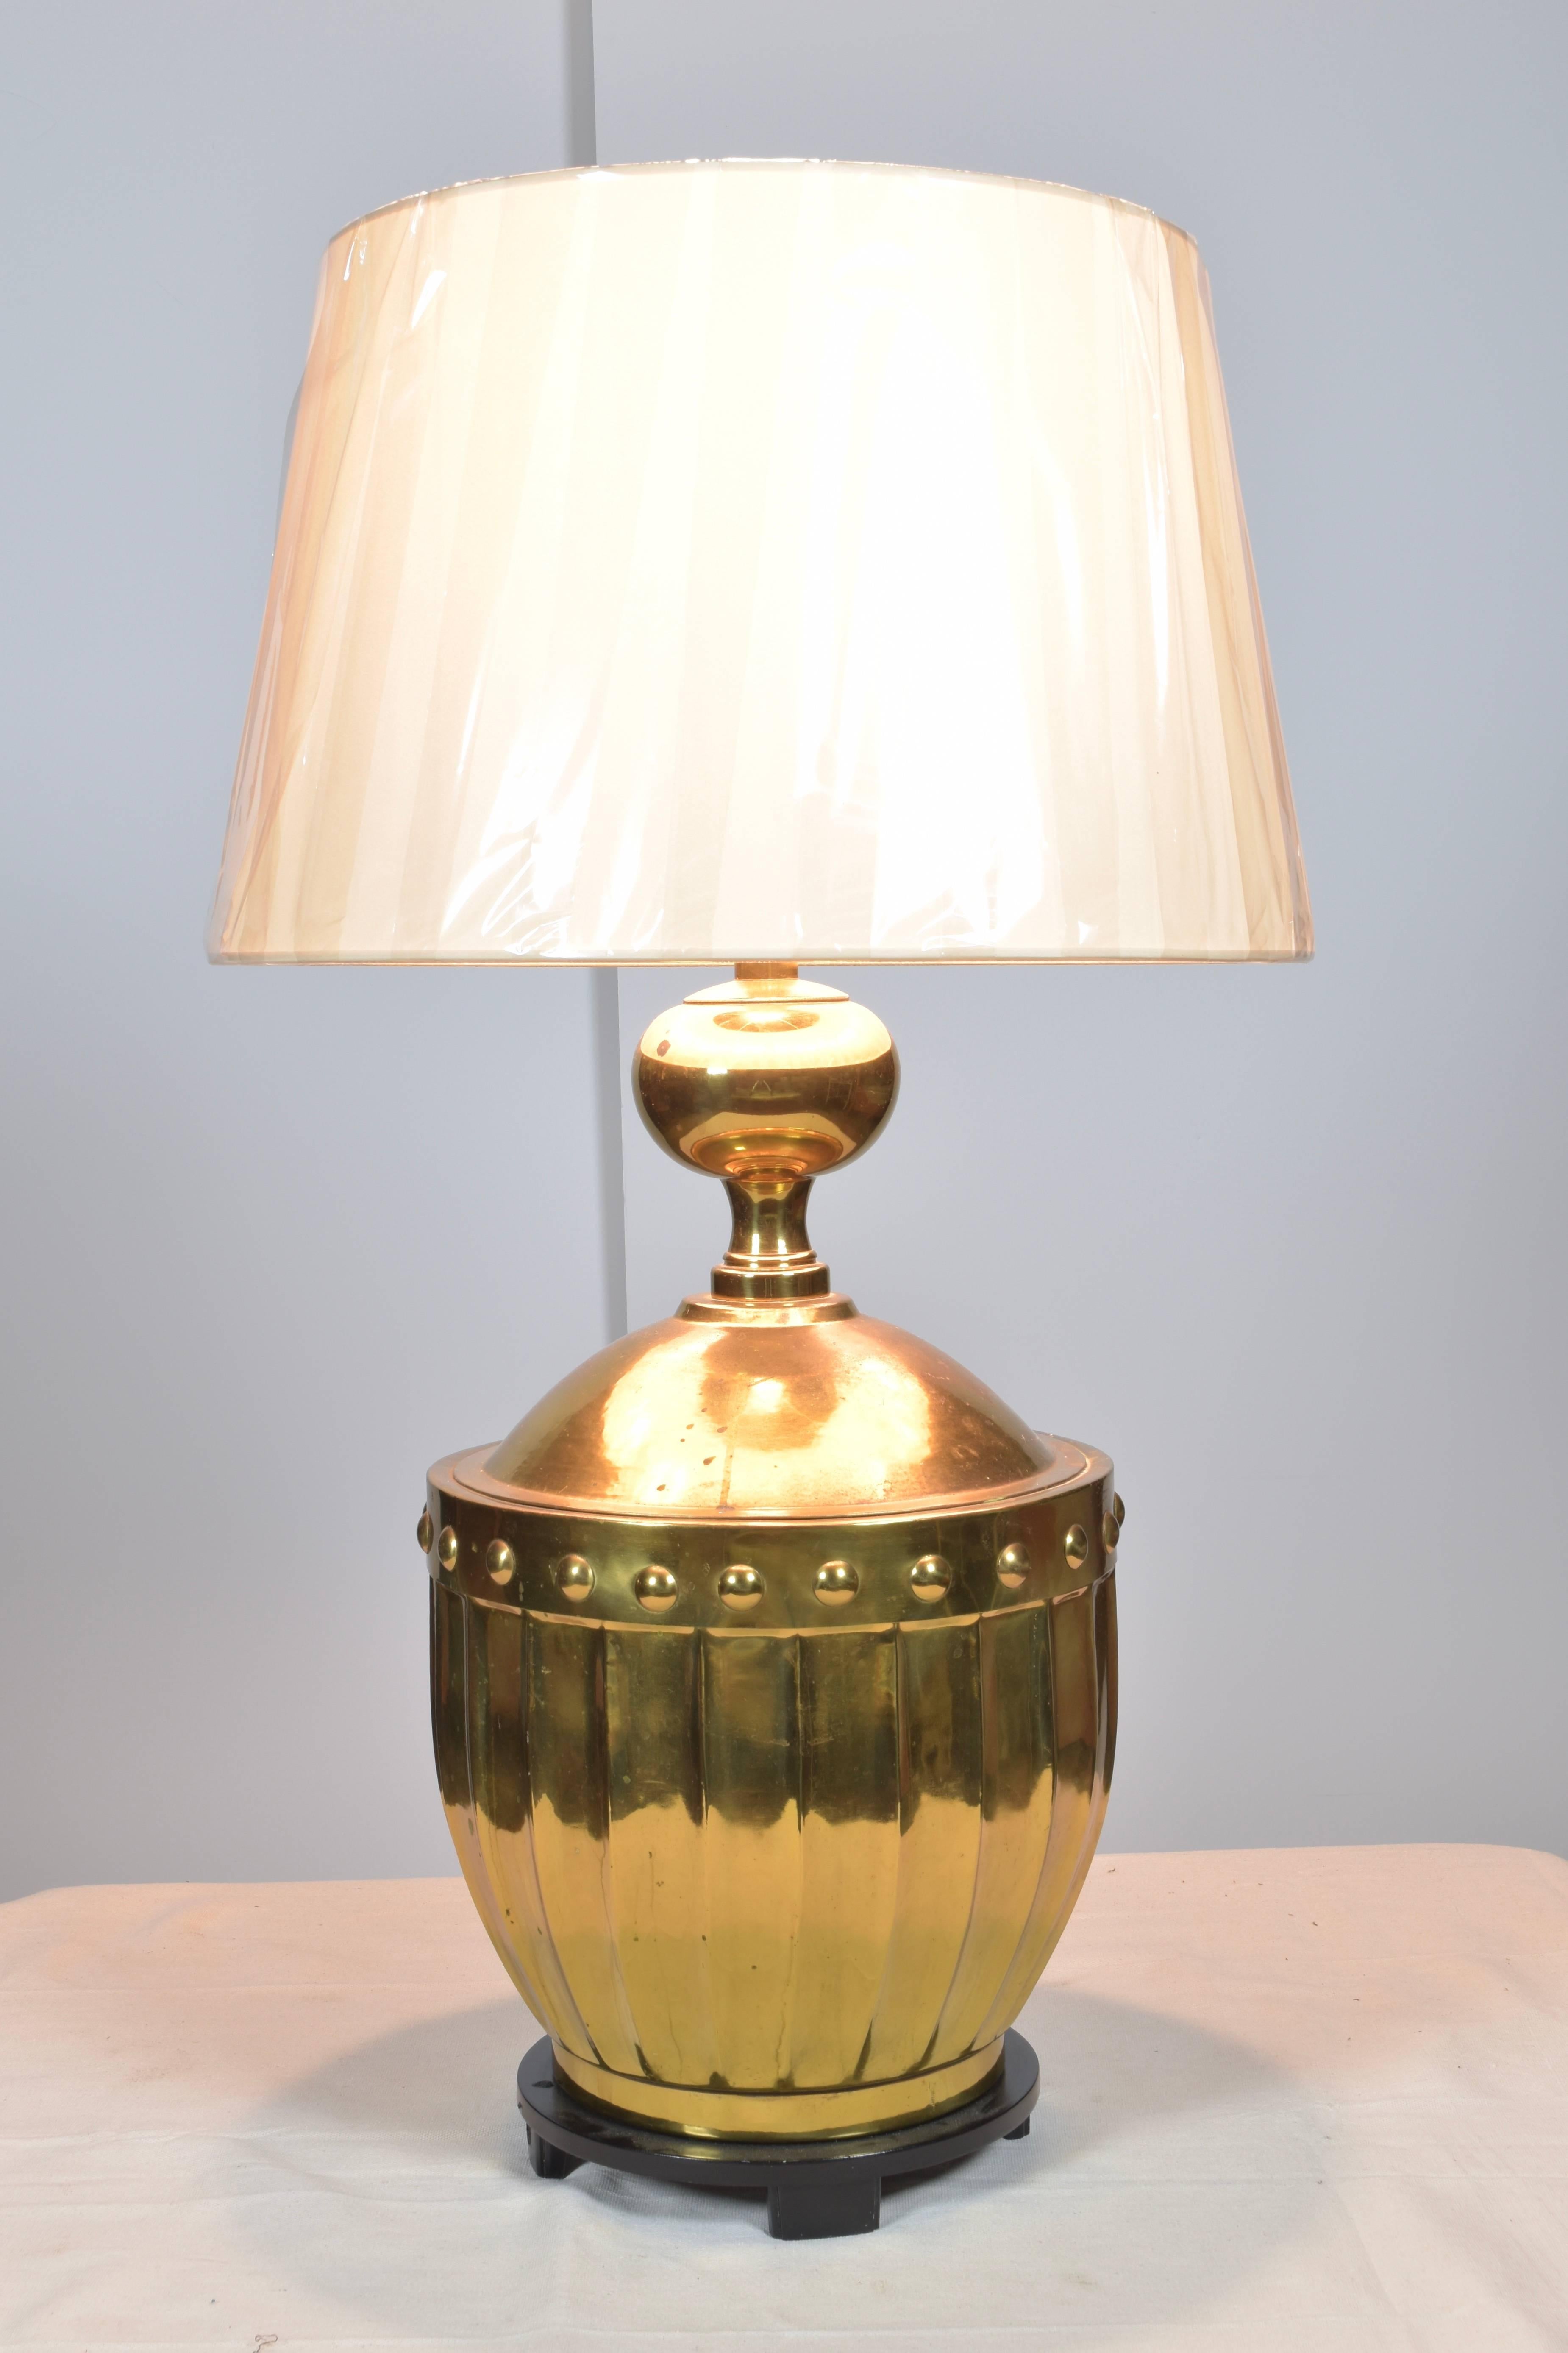 Gorgeous pair of brass Stiffel lamps on wooden stands. These striking urn form lamps have great presence and are encircled with button detailing.